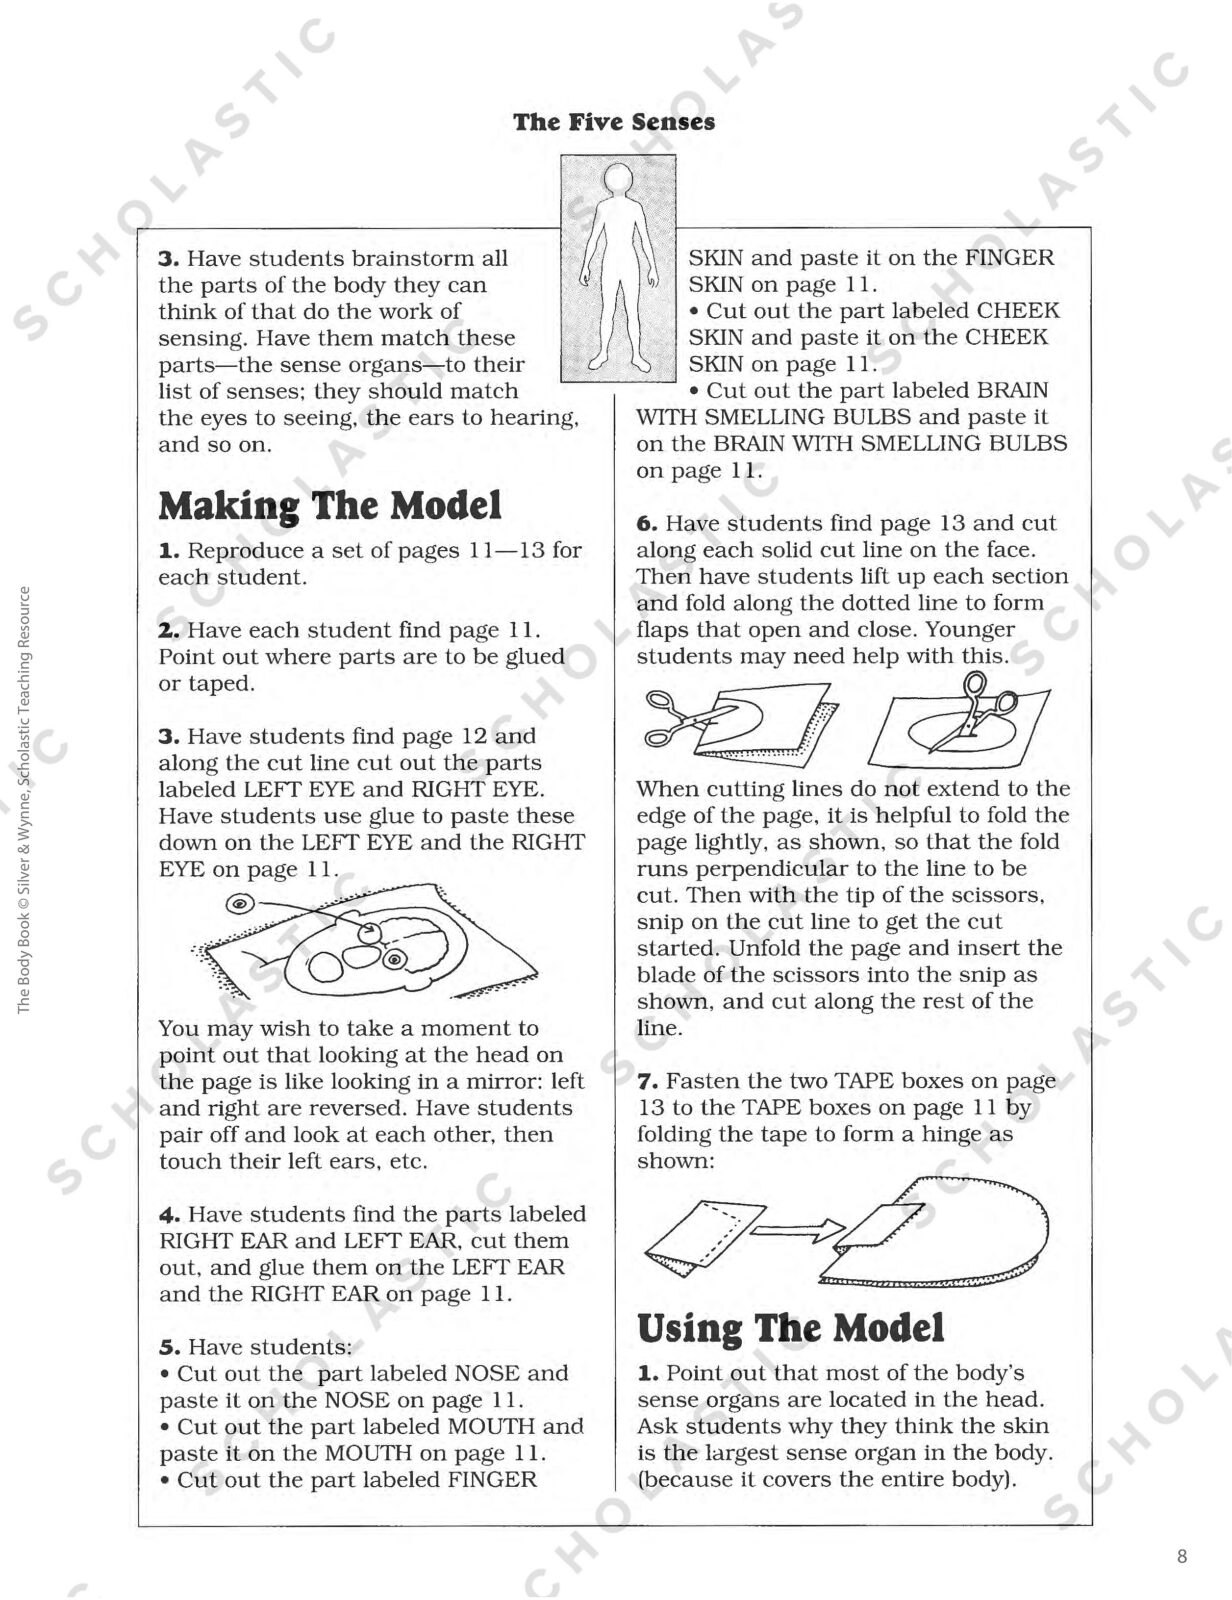  The Body Book: Easy-to-Make Hands-on Models That Teach:  9780545048736: Donald M. Silver, Patricia J. Wynne: Books